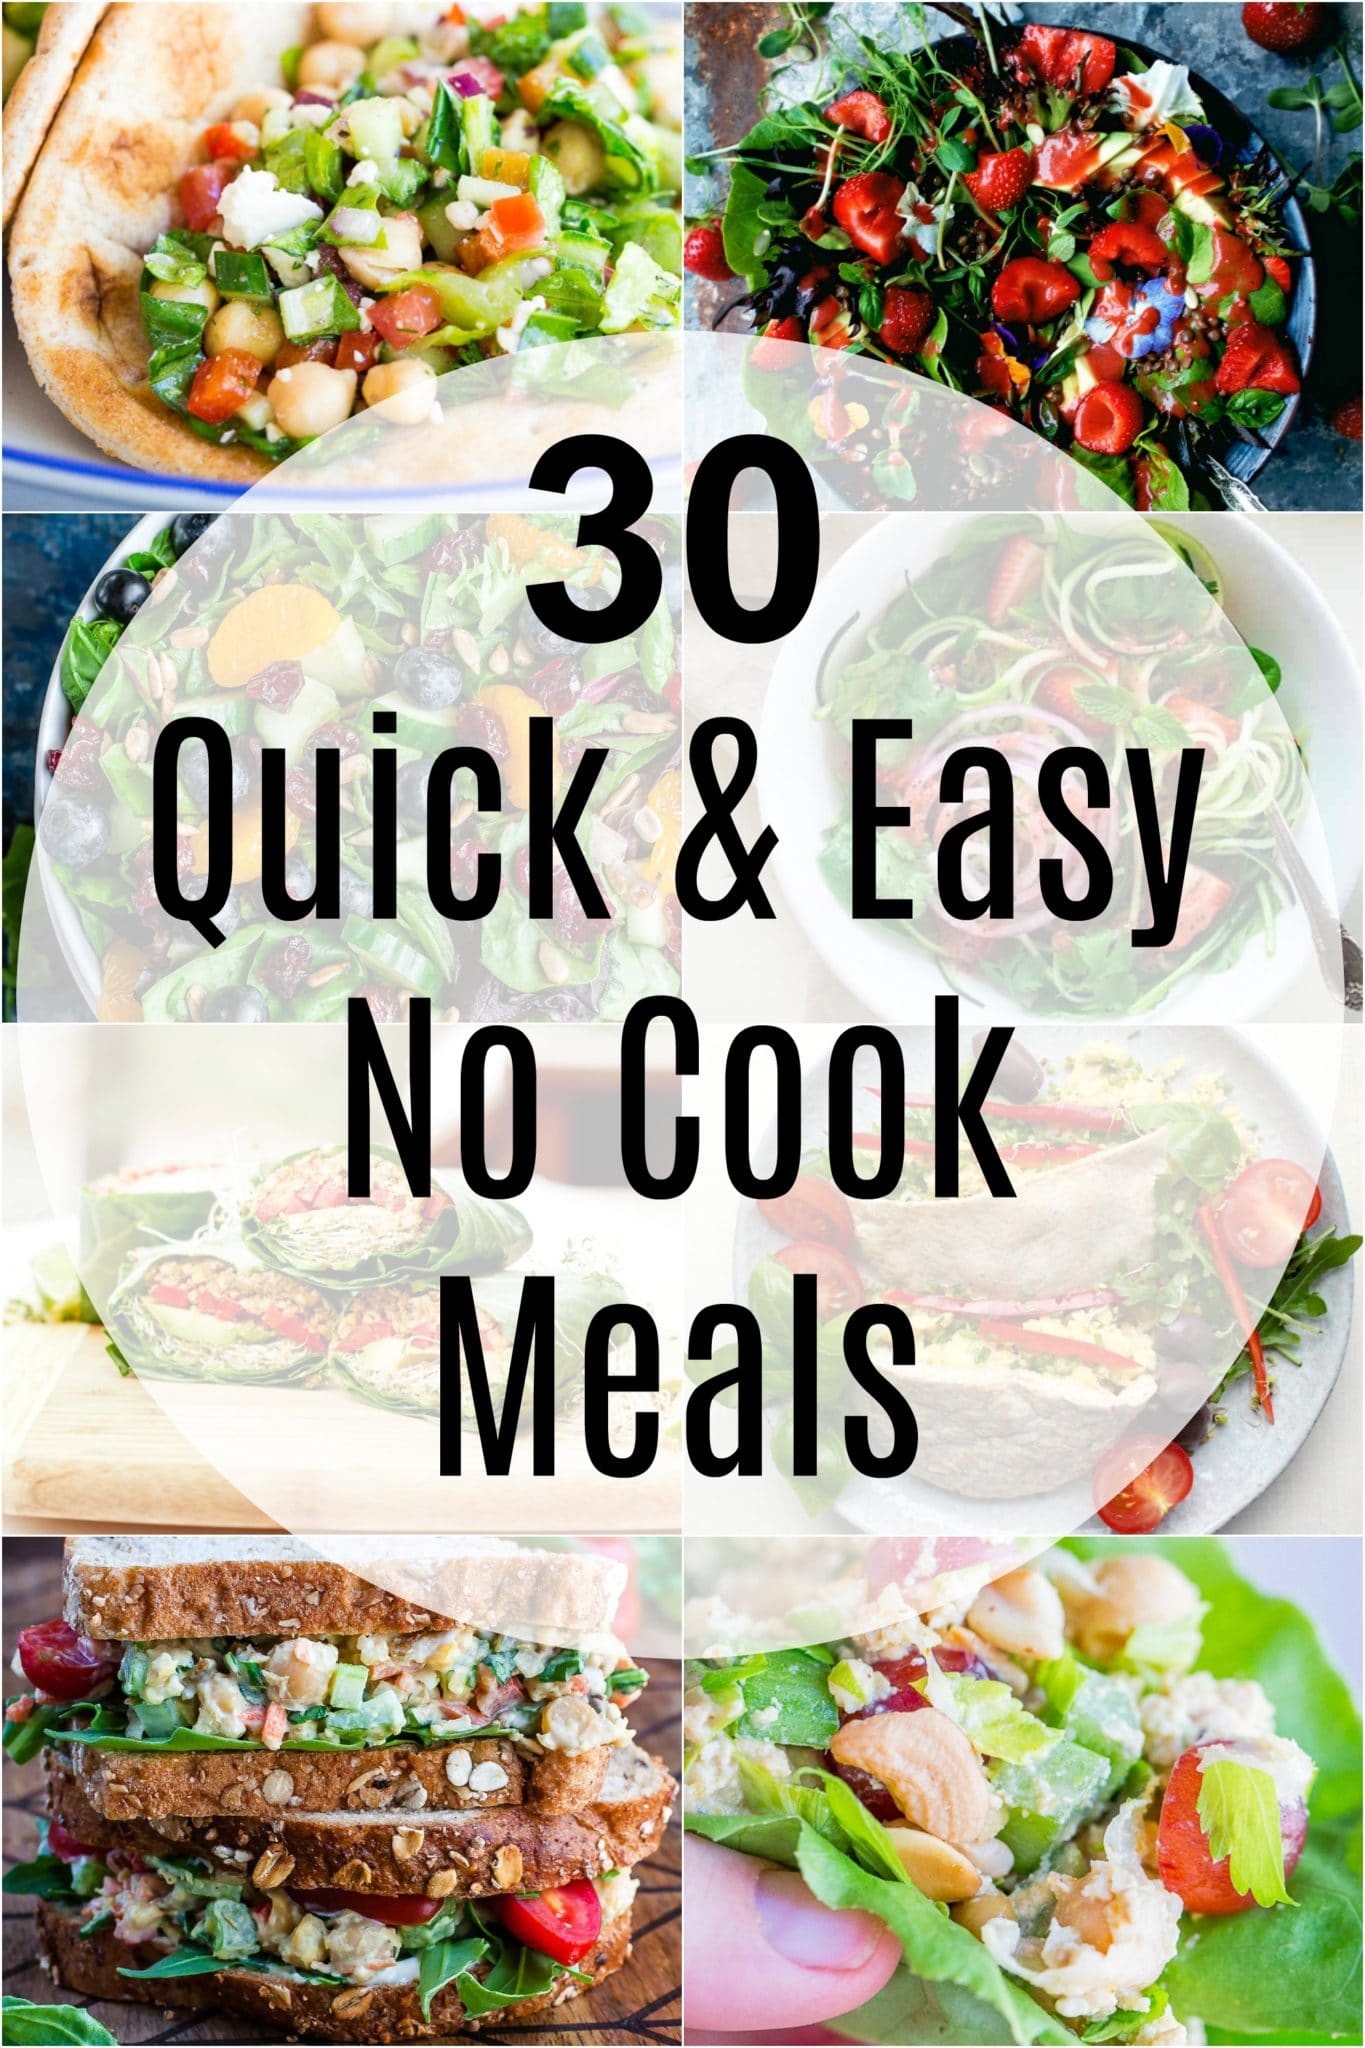 https://www.shelikesfood.com/wp-content/uploads/2017/06/30-Quick-and-Easy-No-Cook-Meals-scaled.jpg